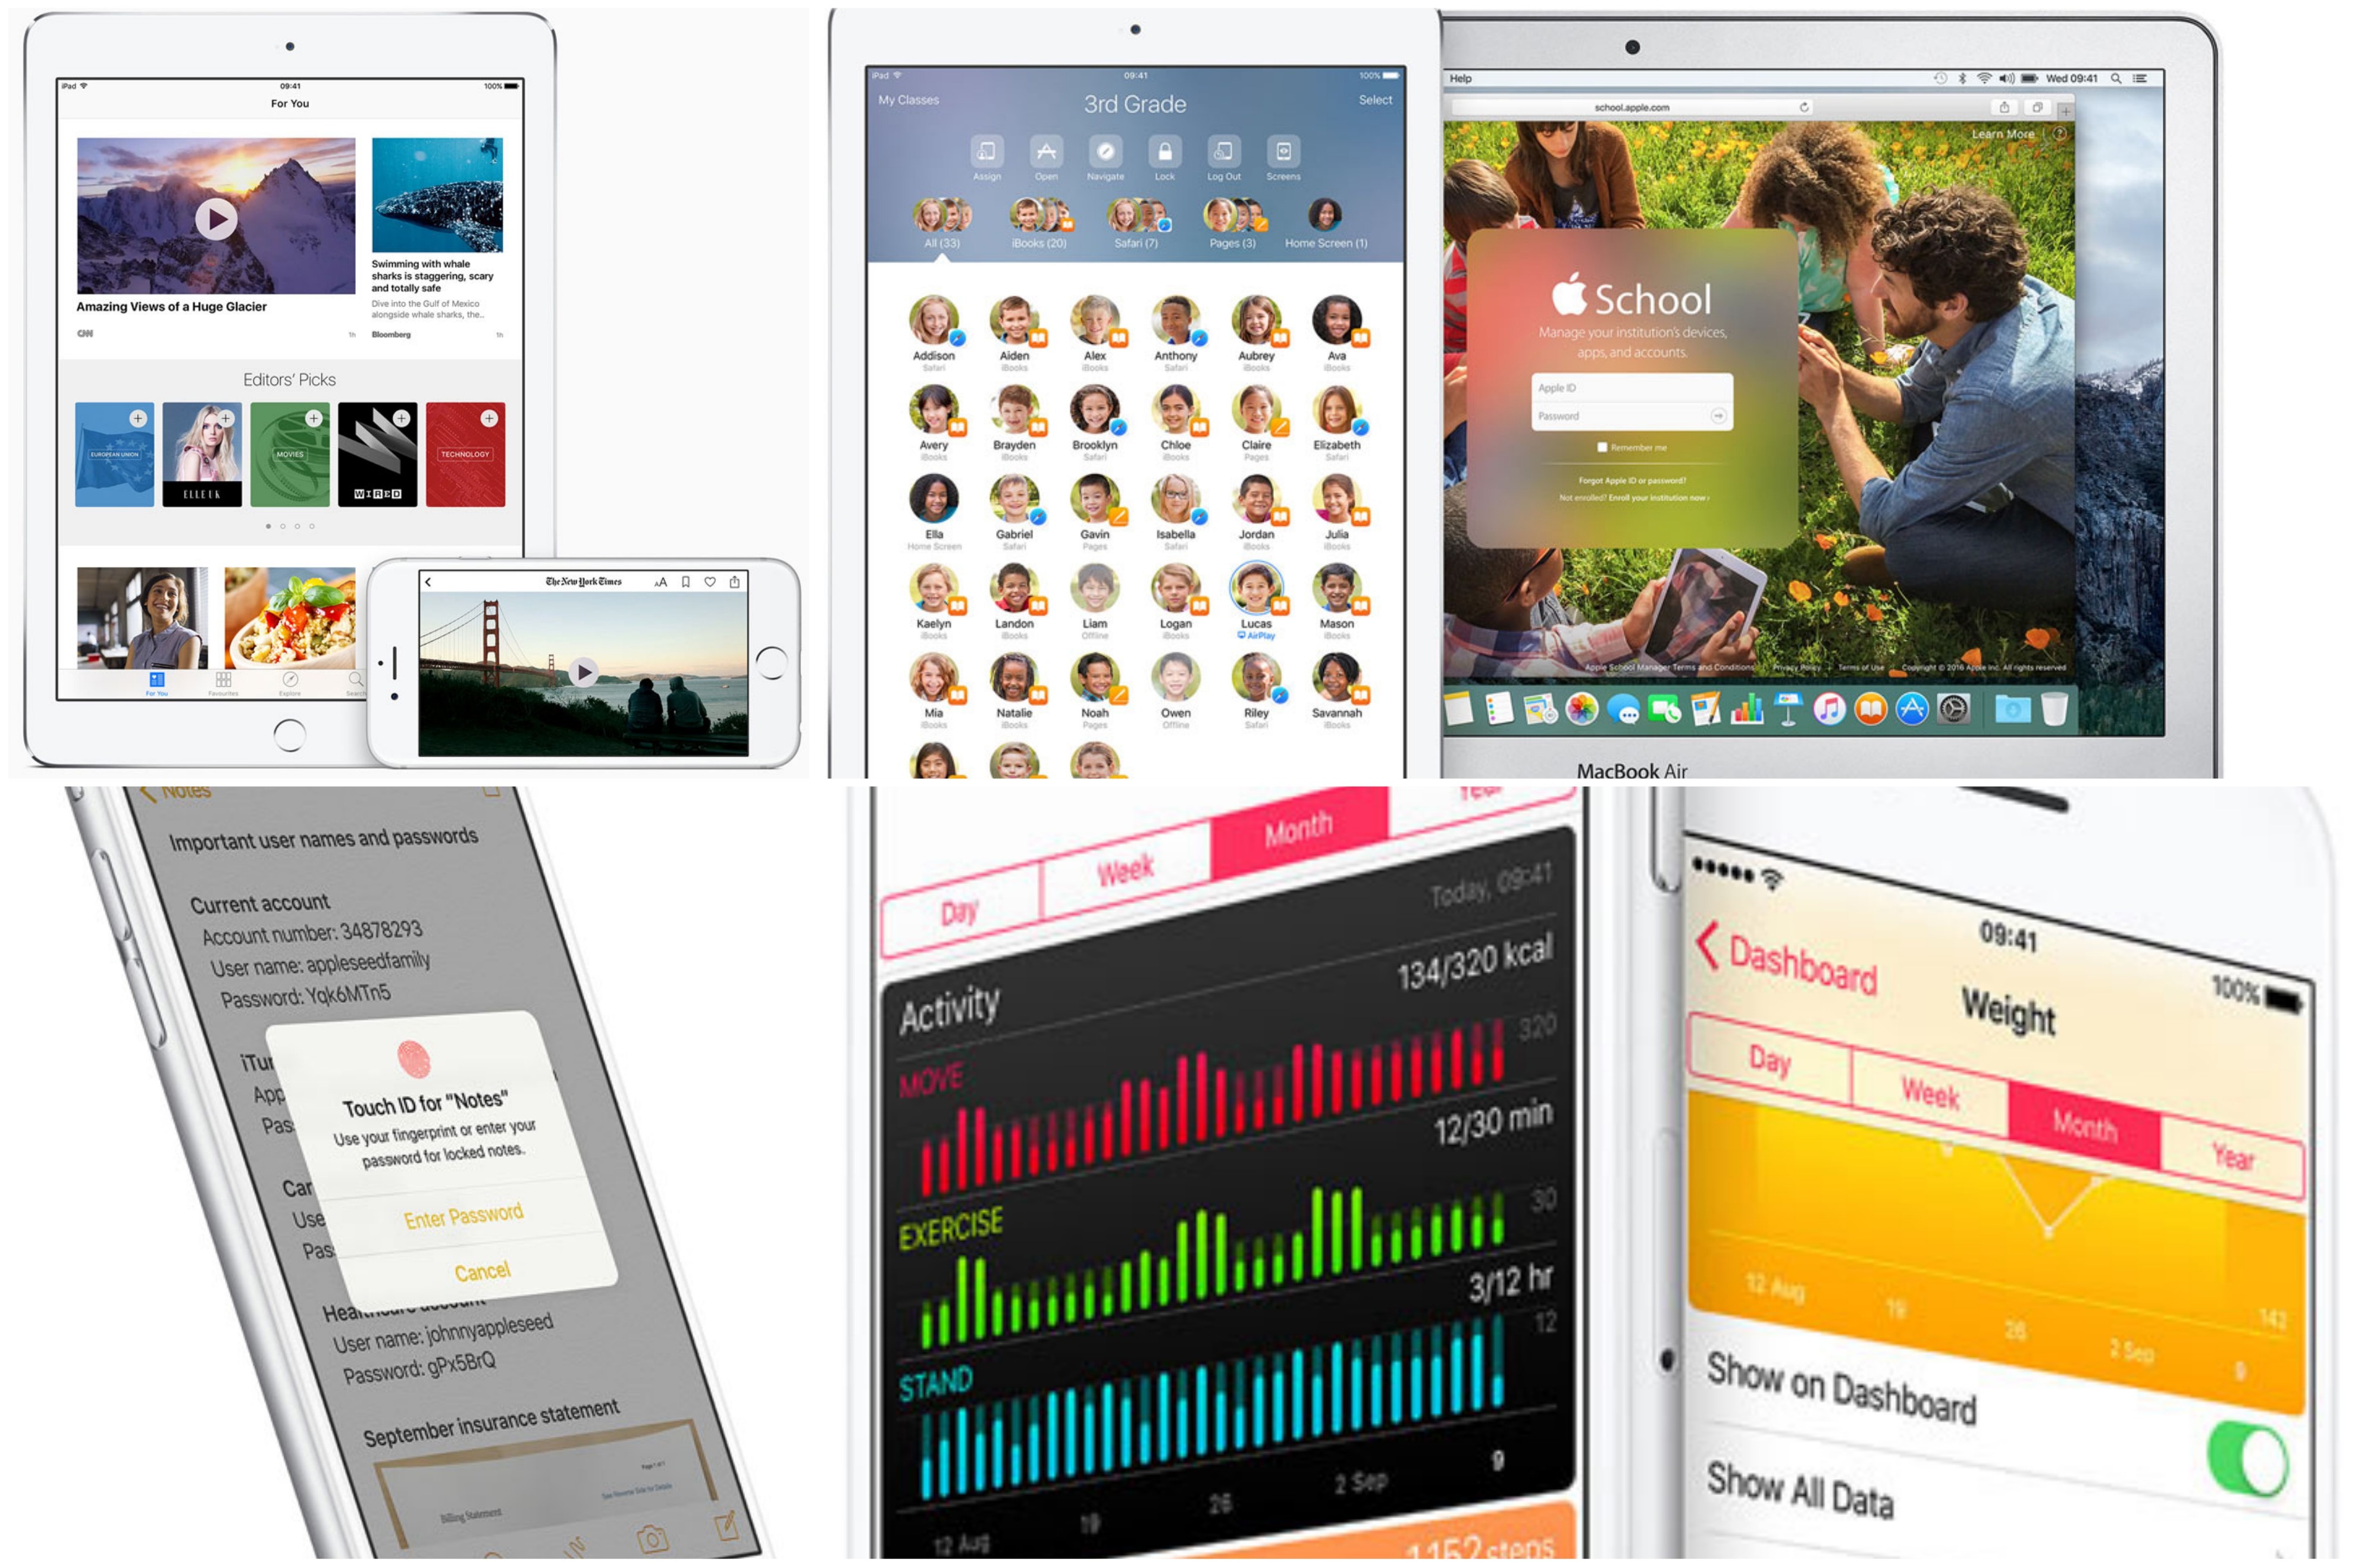 What's new in iOS 9.3?